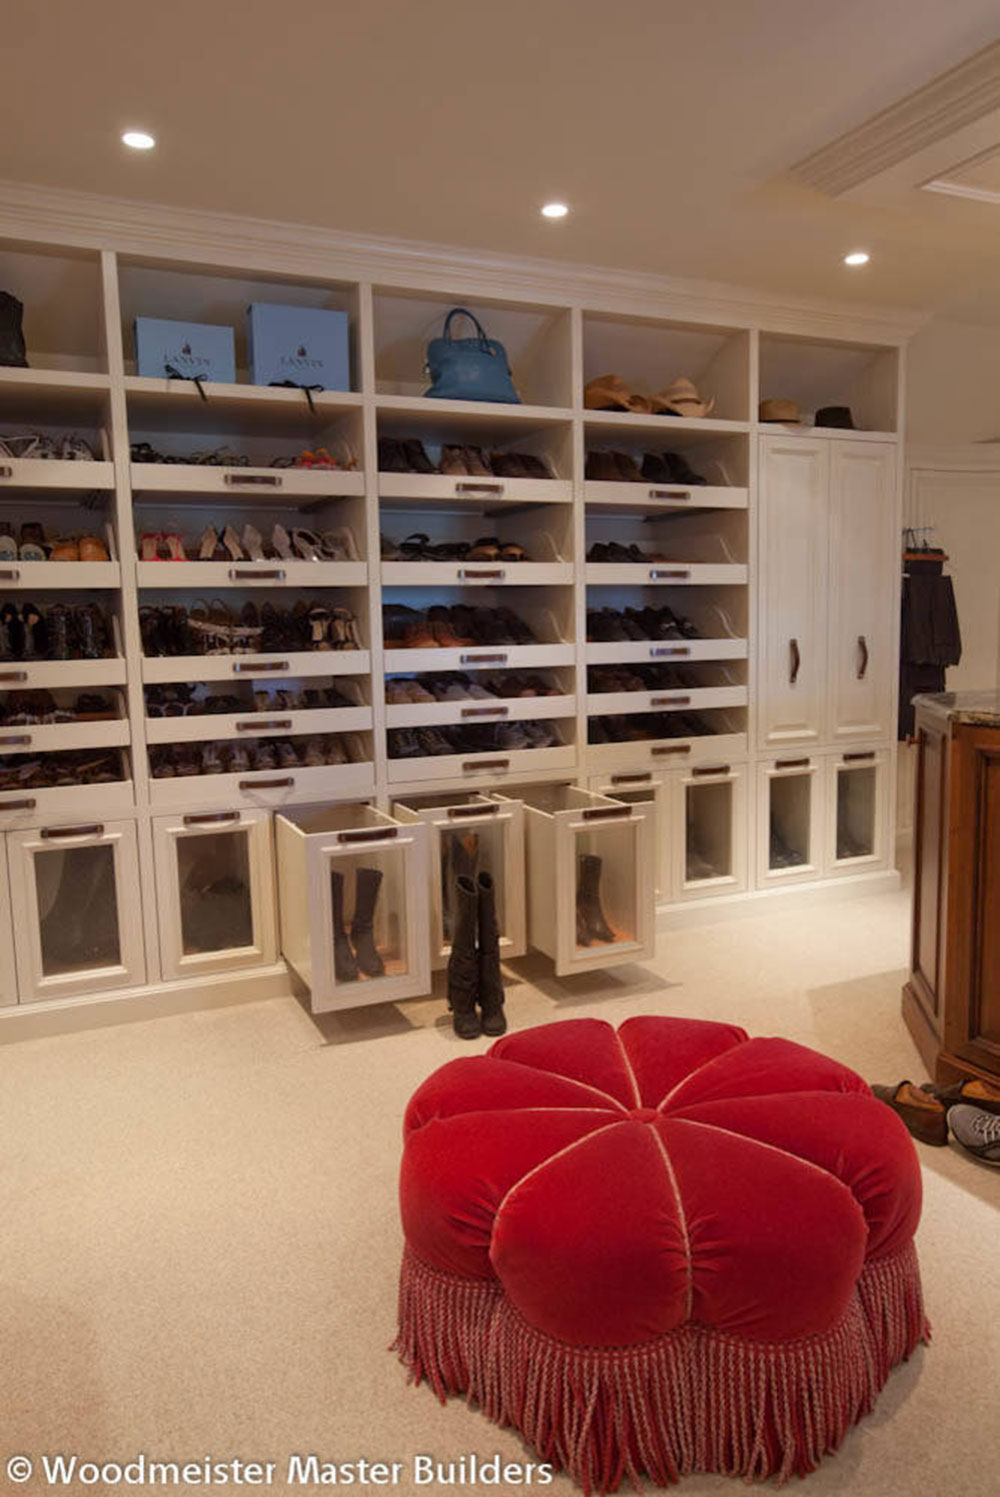 Woodmeister-Master-Builders Shoe Storage Ideas For Better Organizing